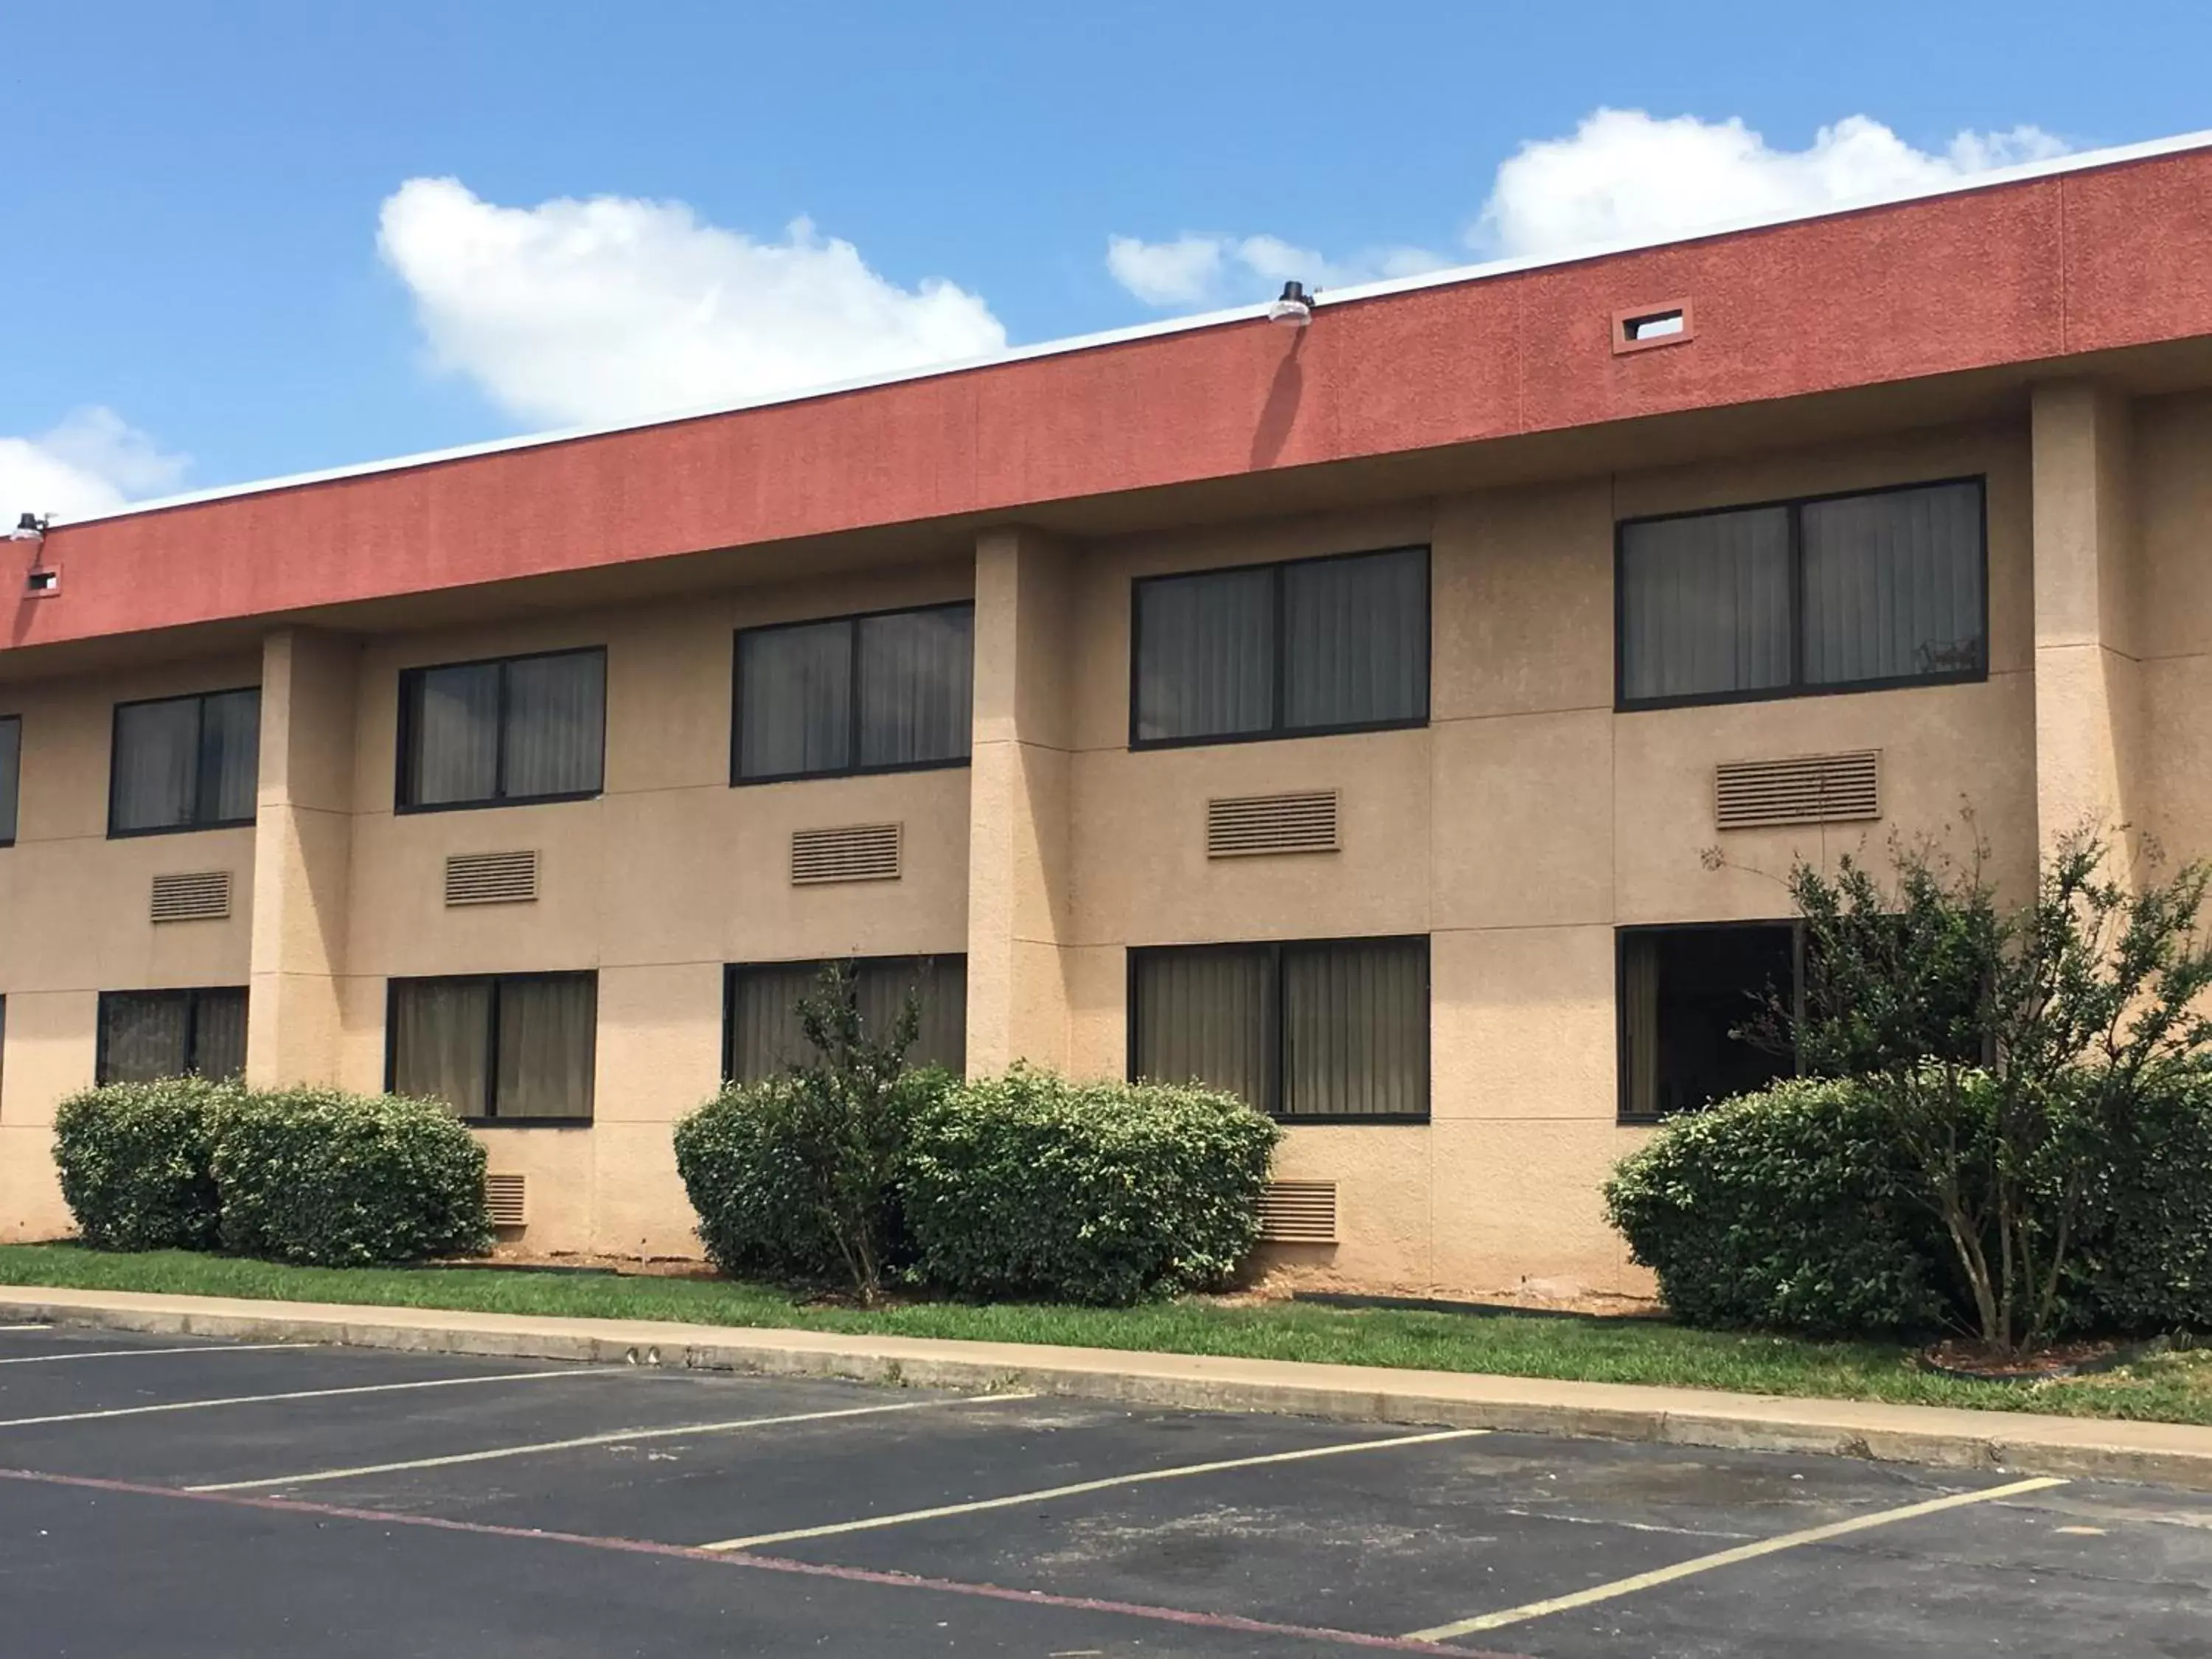 Area and facilities, Property Building in Days Inn by Wyndham Sherman